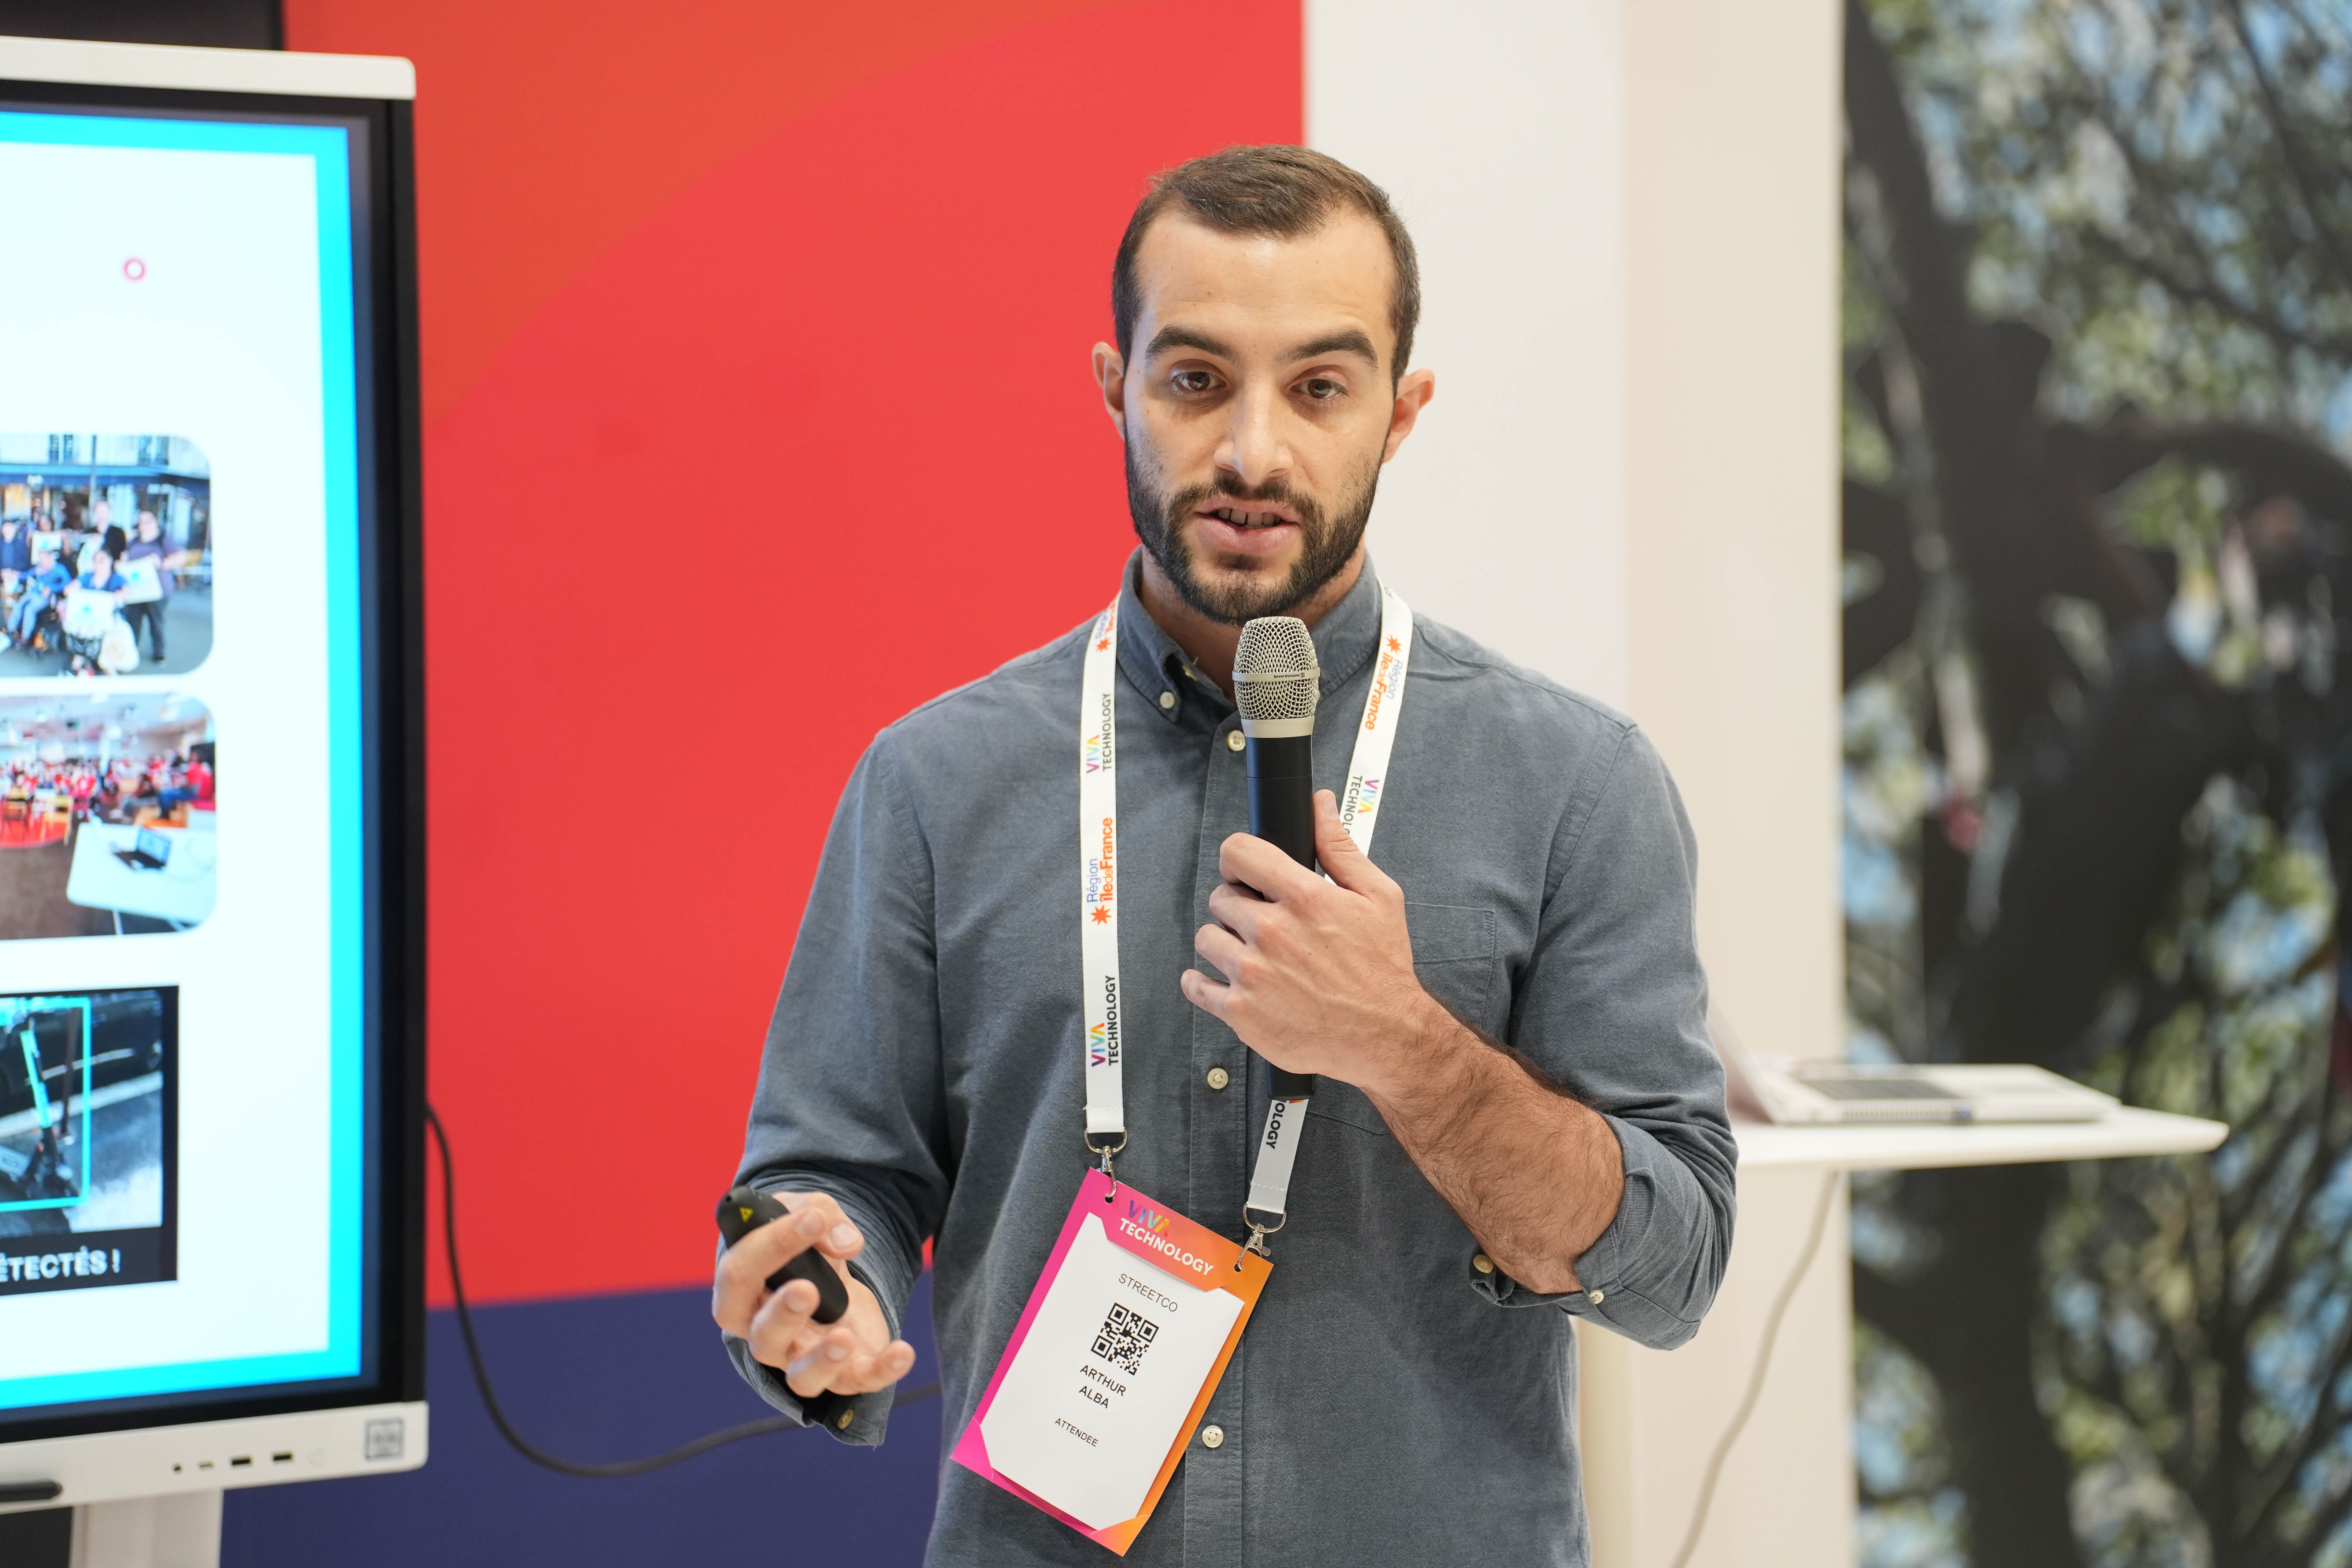 Pitch at VivaTech